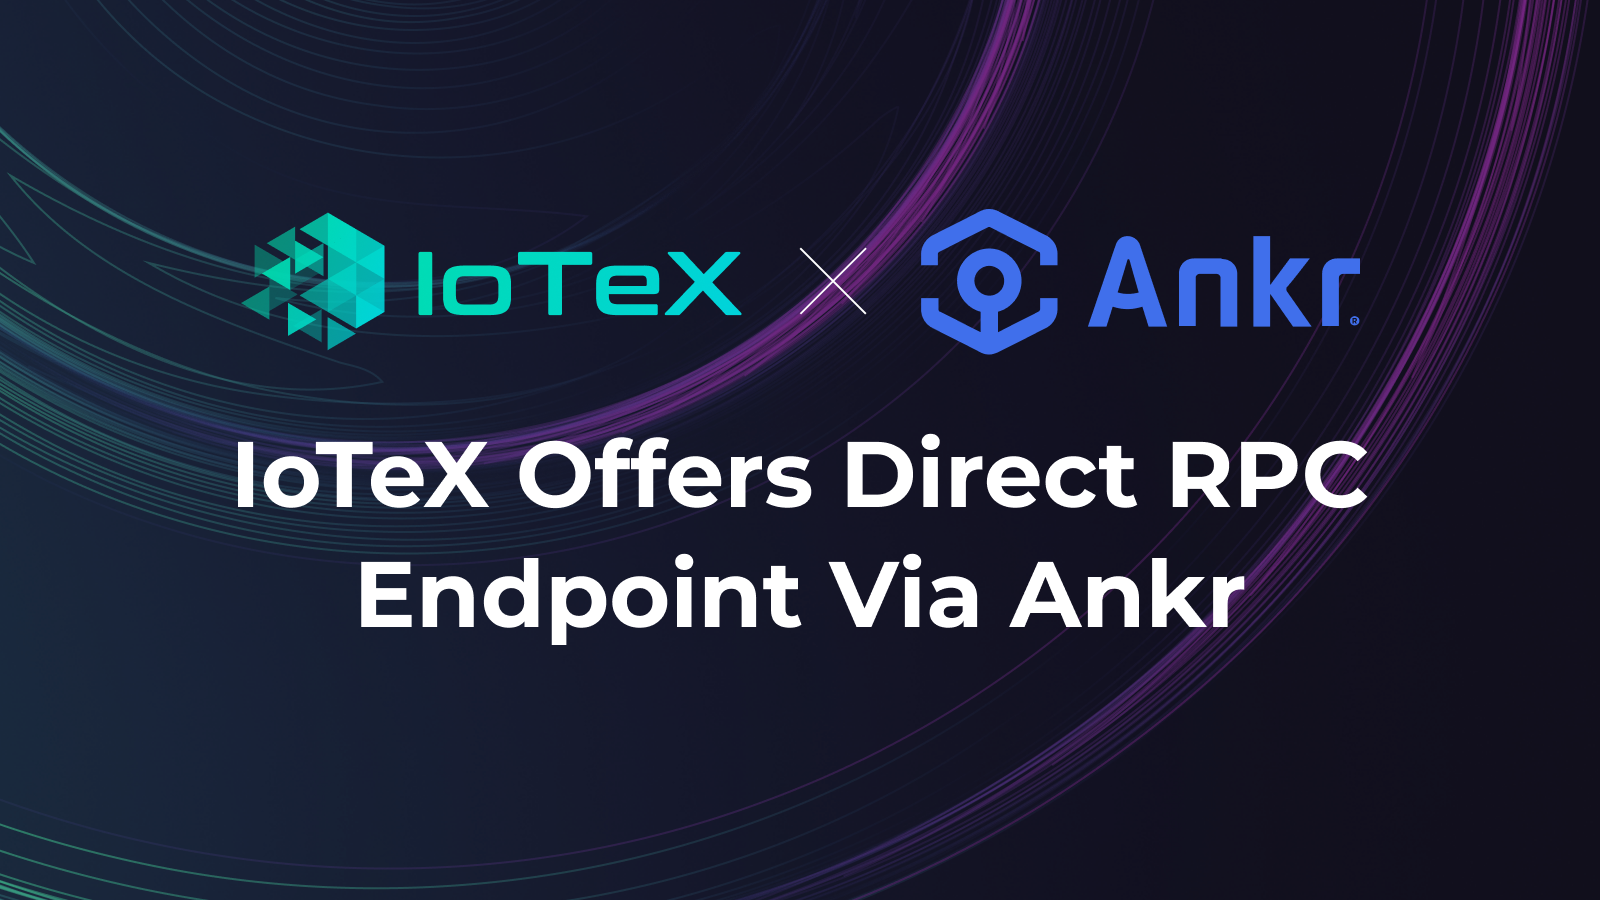 IoTeX Offers Direct RPC Endpoint Via Ankr